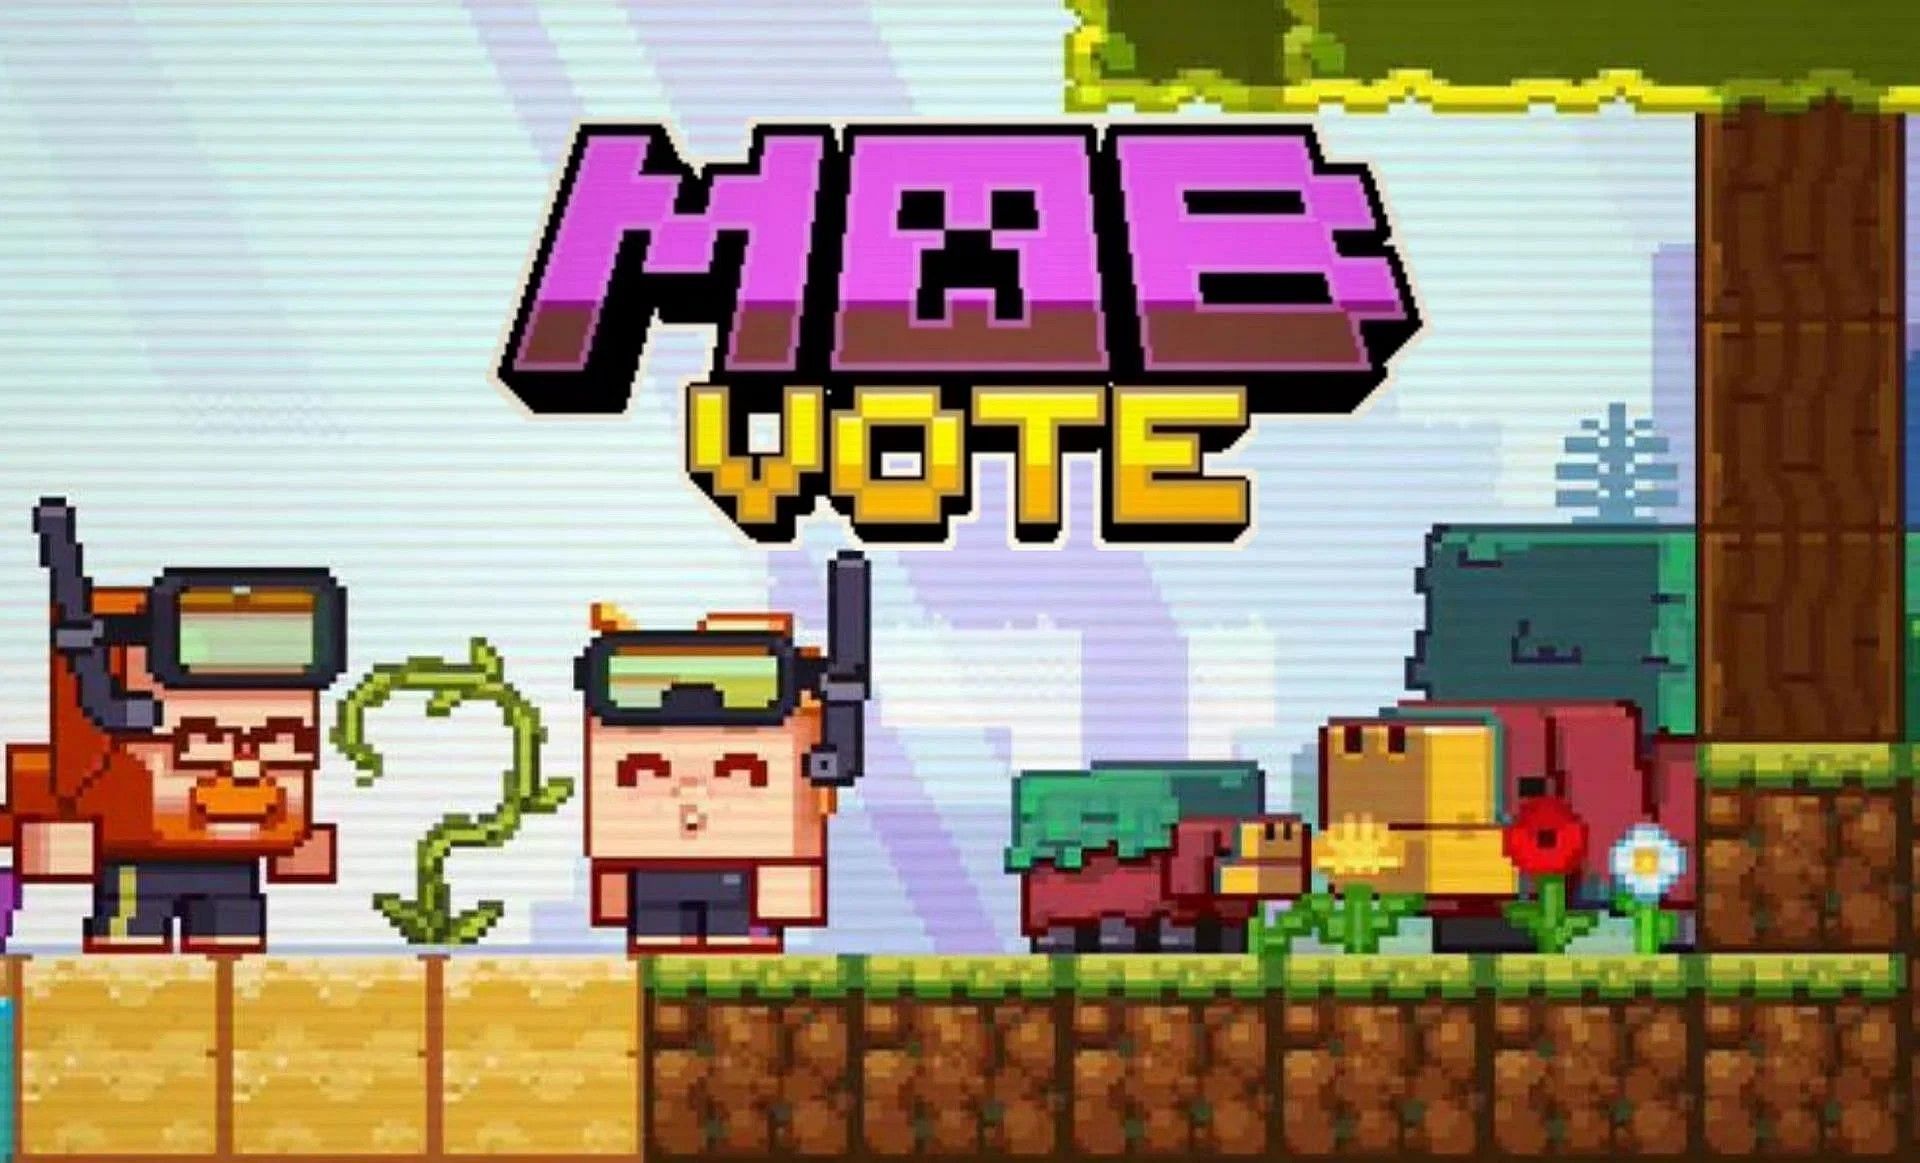 All three mobs candidates in Minecraft Mob Vote 2022 and their uses